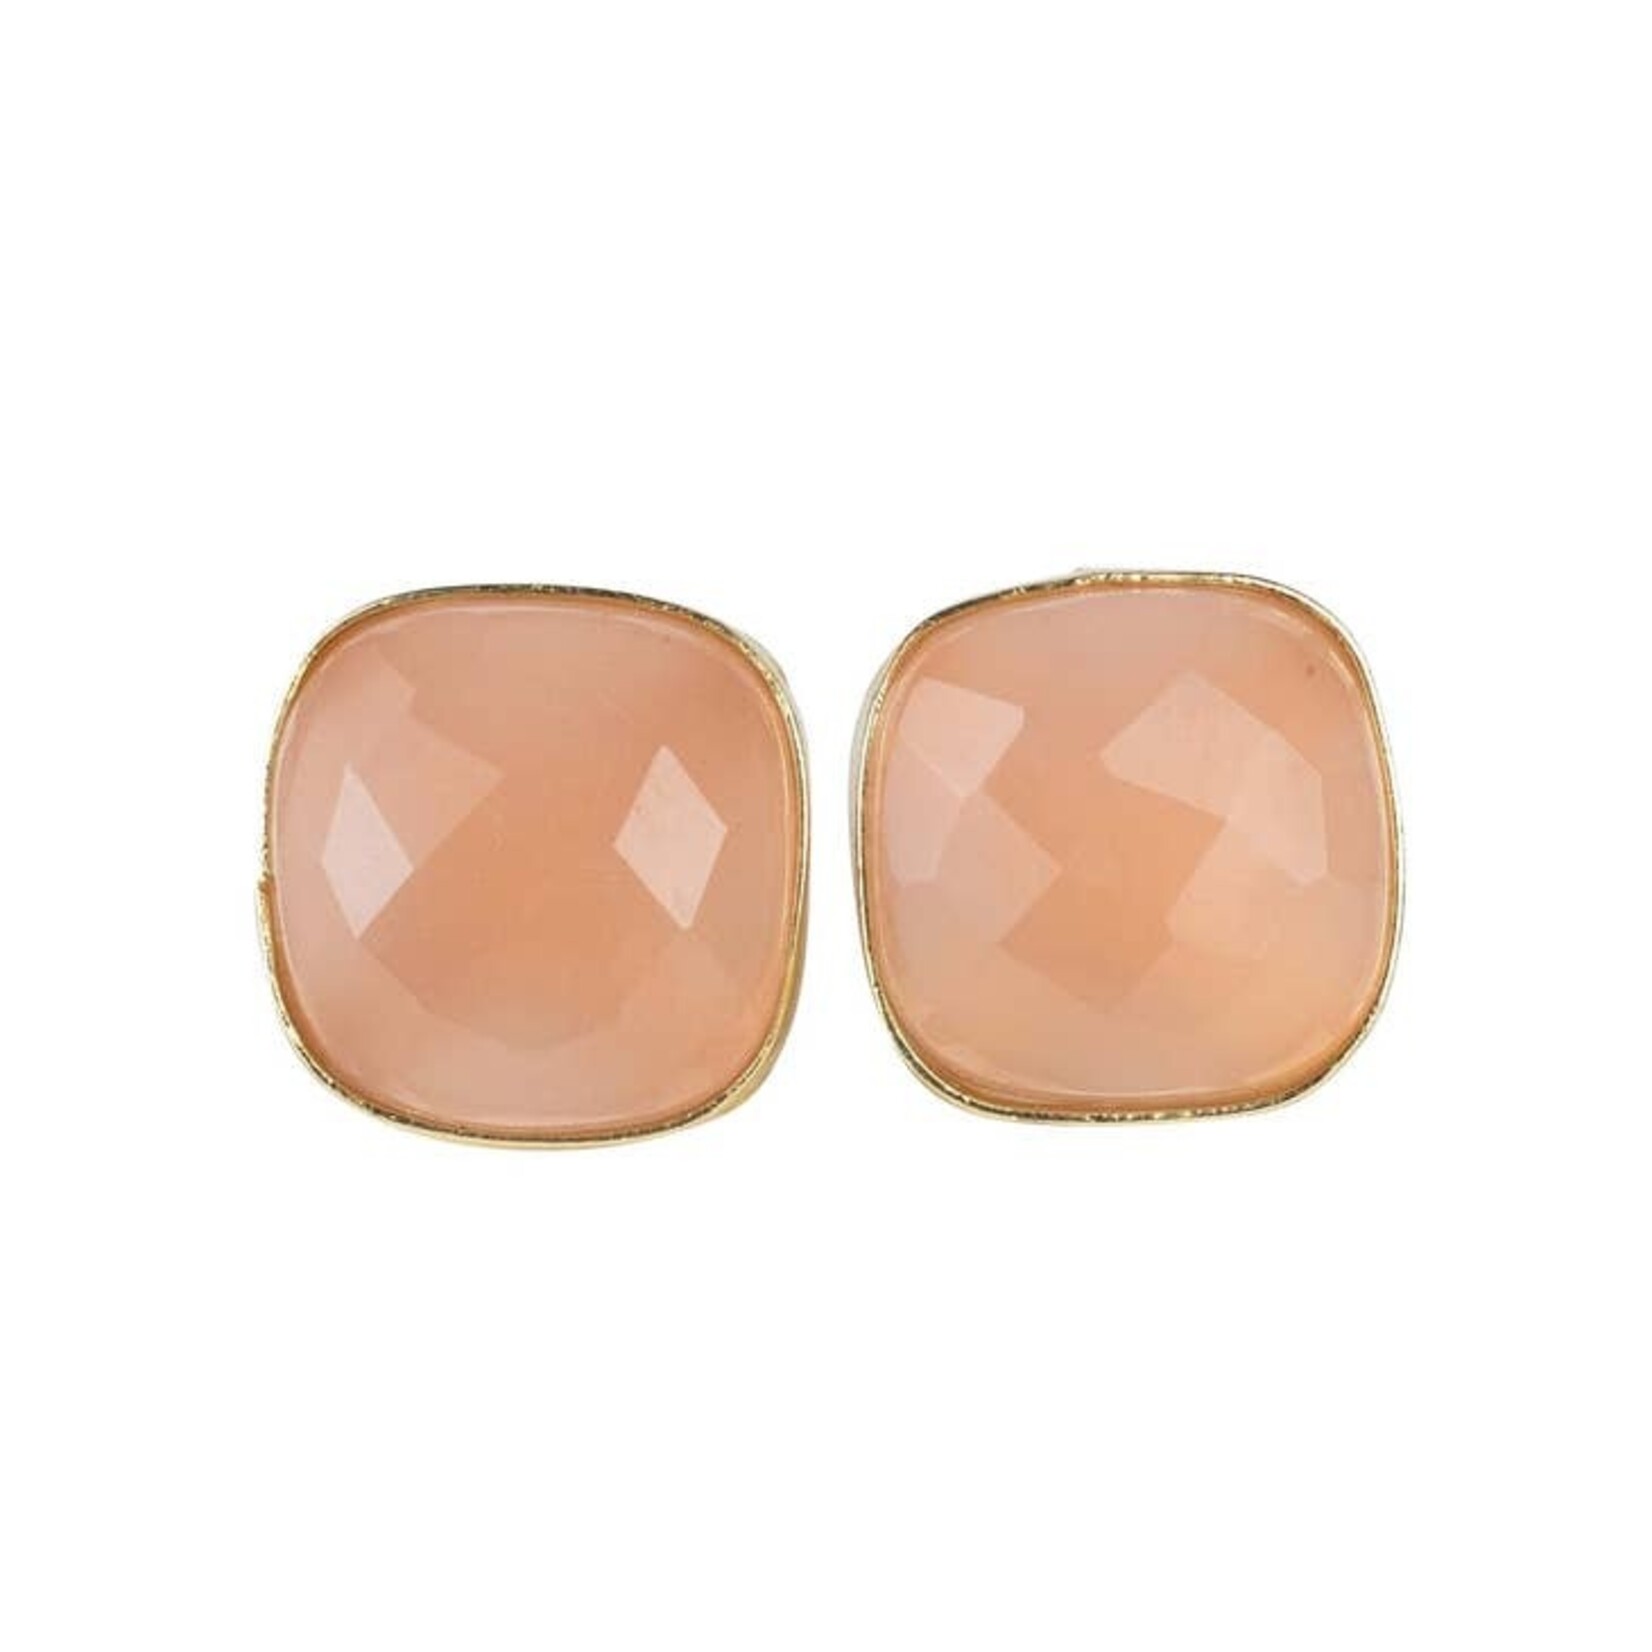 Ten Thousand Villages USA Rose Onyx Stud Earrings, India